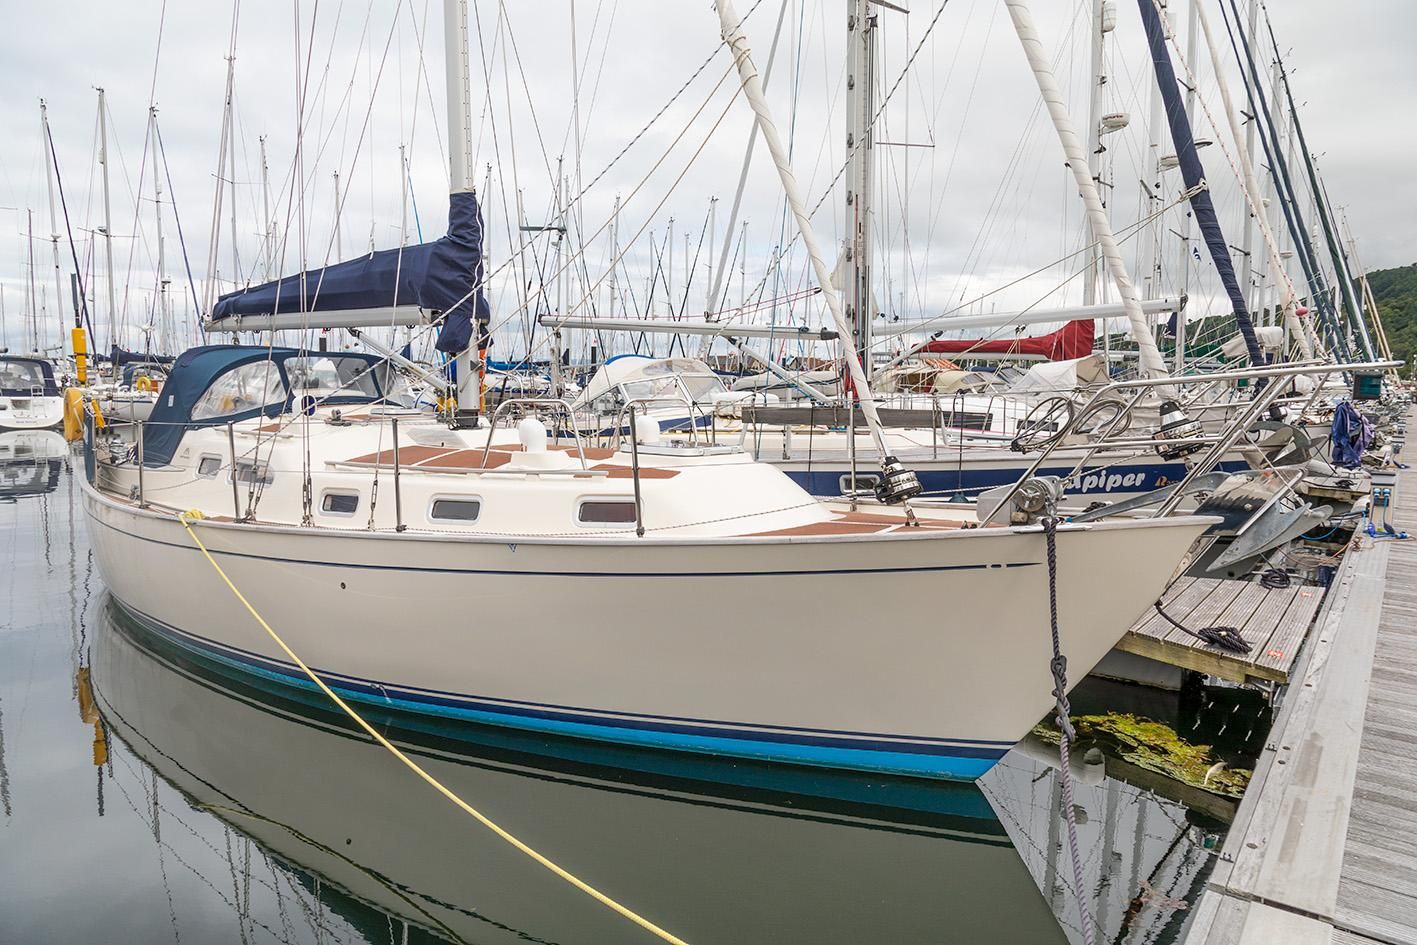 sailboats for sale in victoria and vancouver area